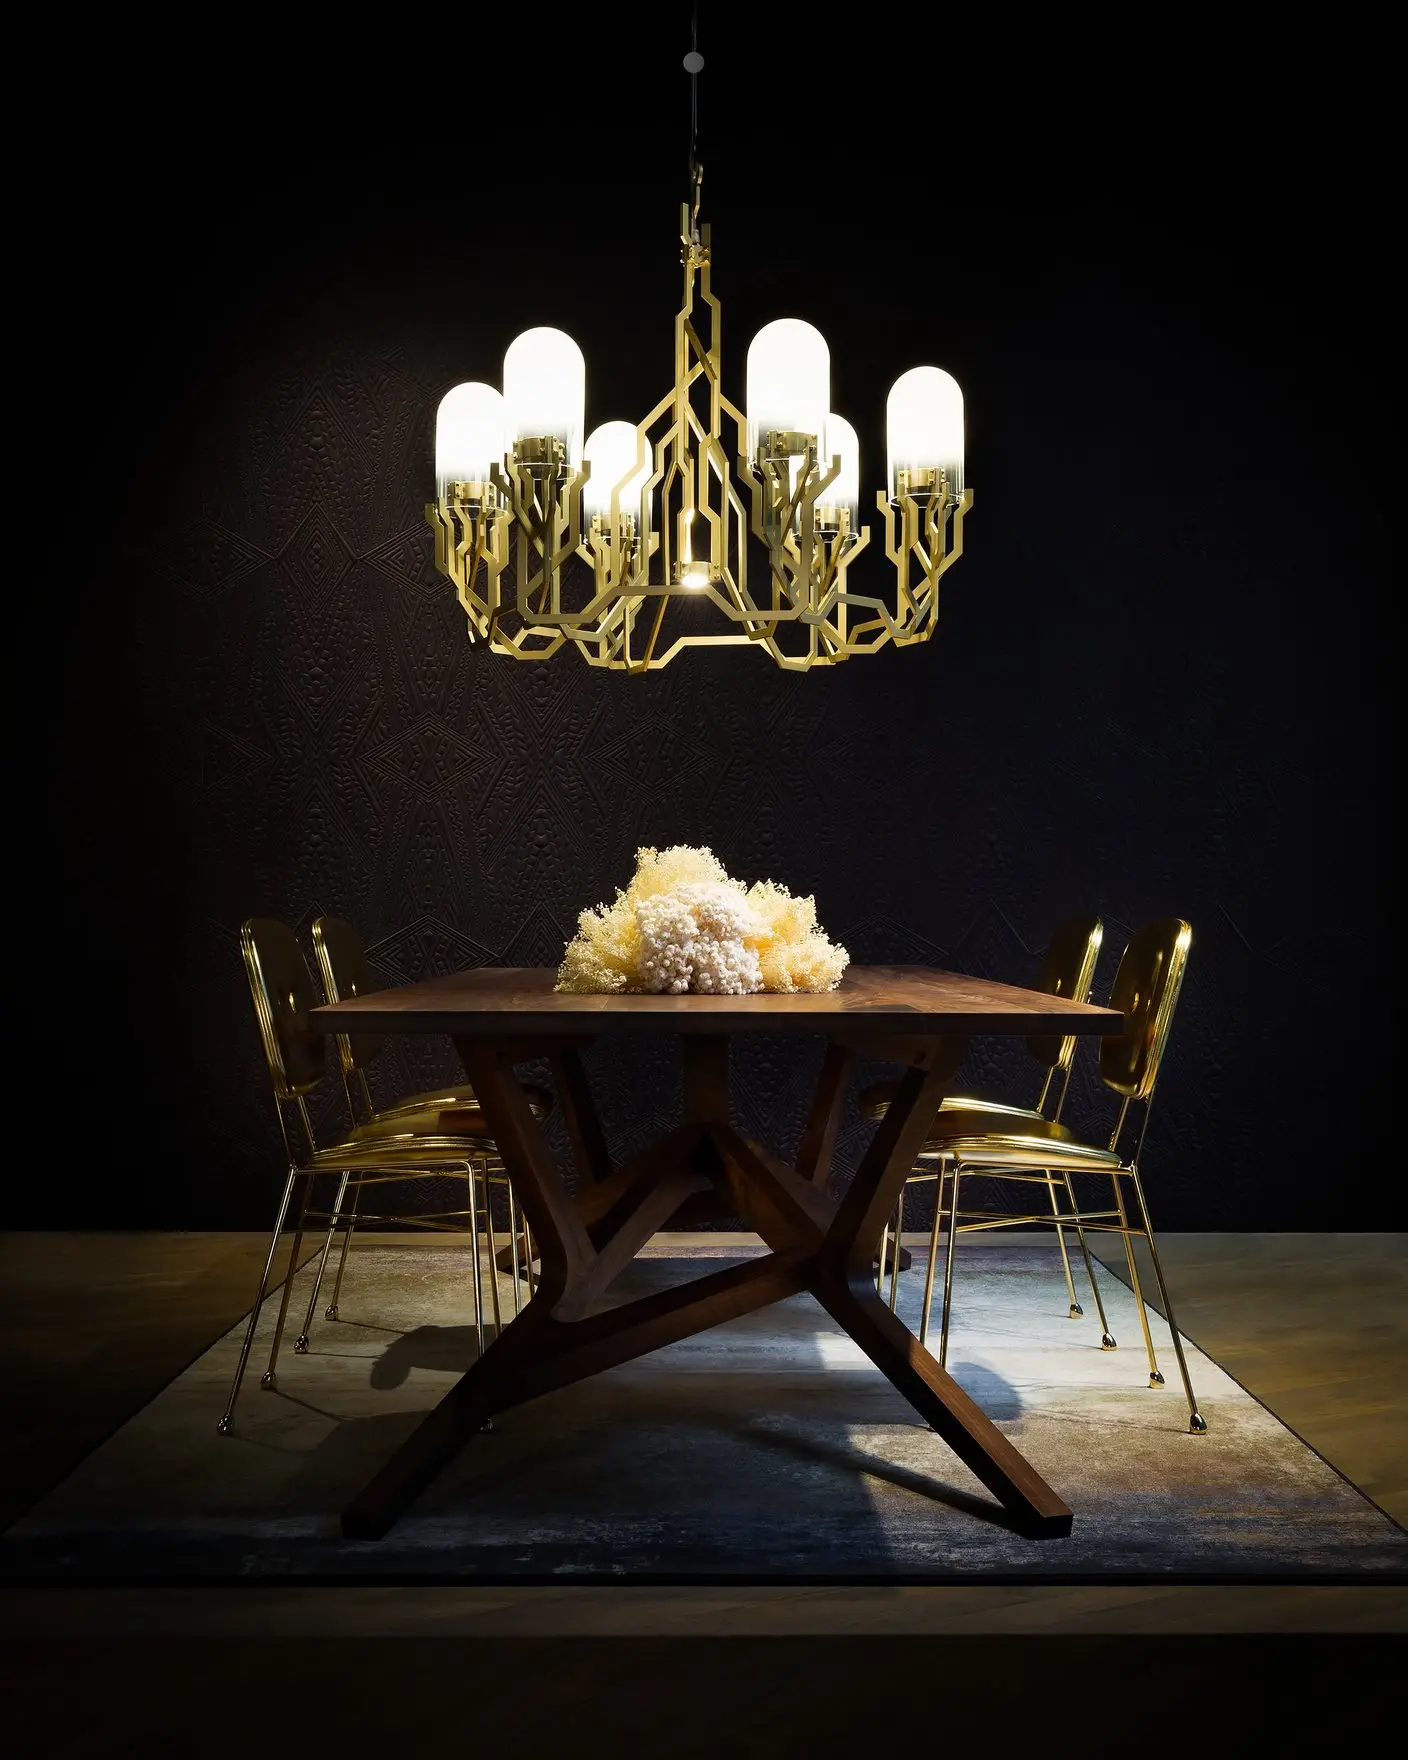 Chandelier PLANT by Moooi